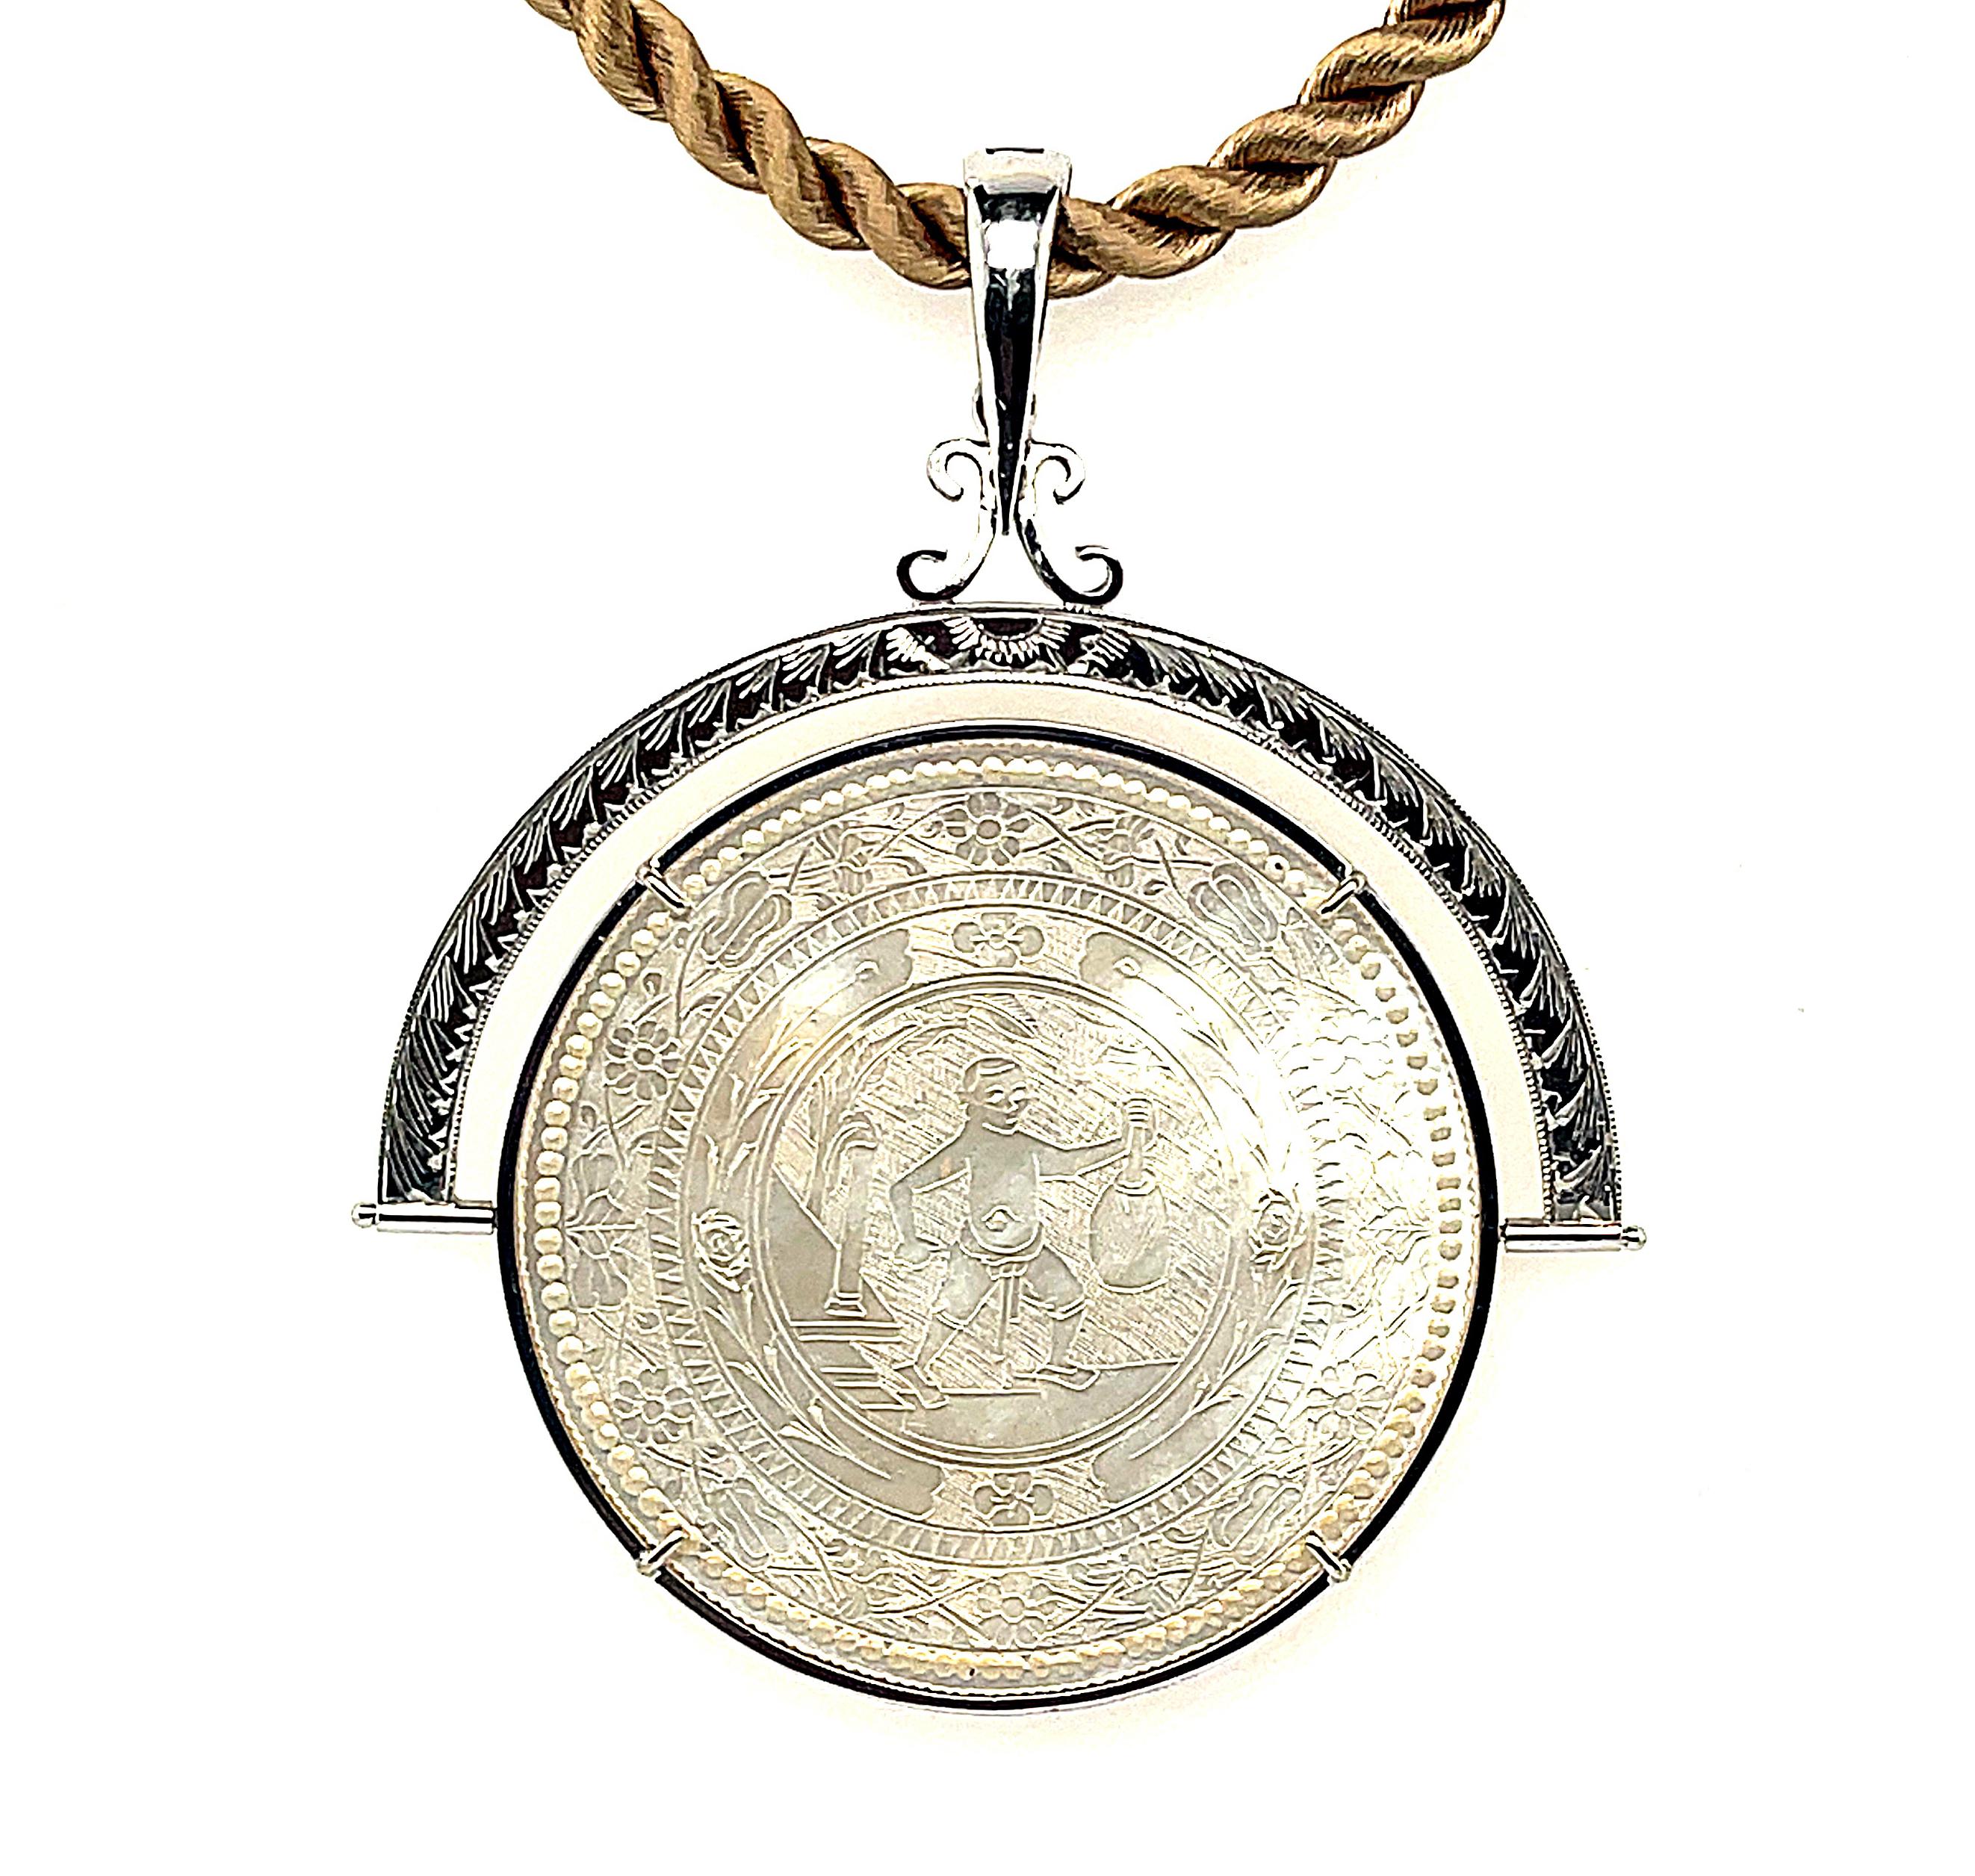 This eye-catching, reversible pendant / enhancer combination features a large, antique mother-of-pearl gambling counter set in 14k white gold. The round gaming counter has been intricately hand-engraved with a scene depicting life in ancient China